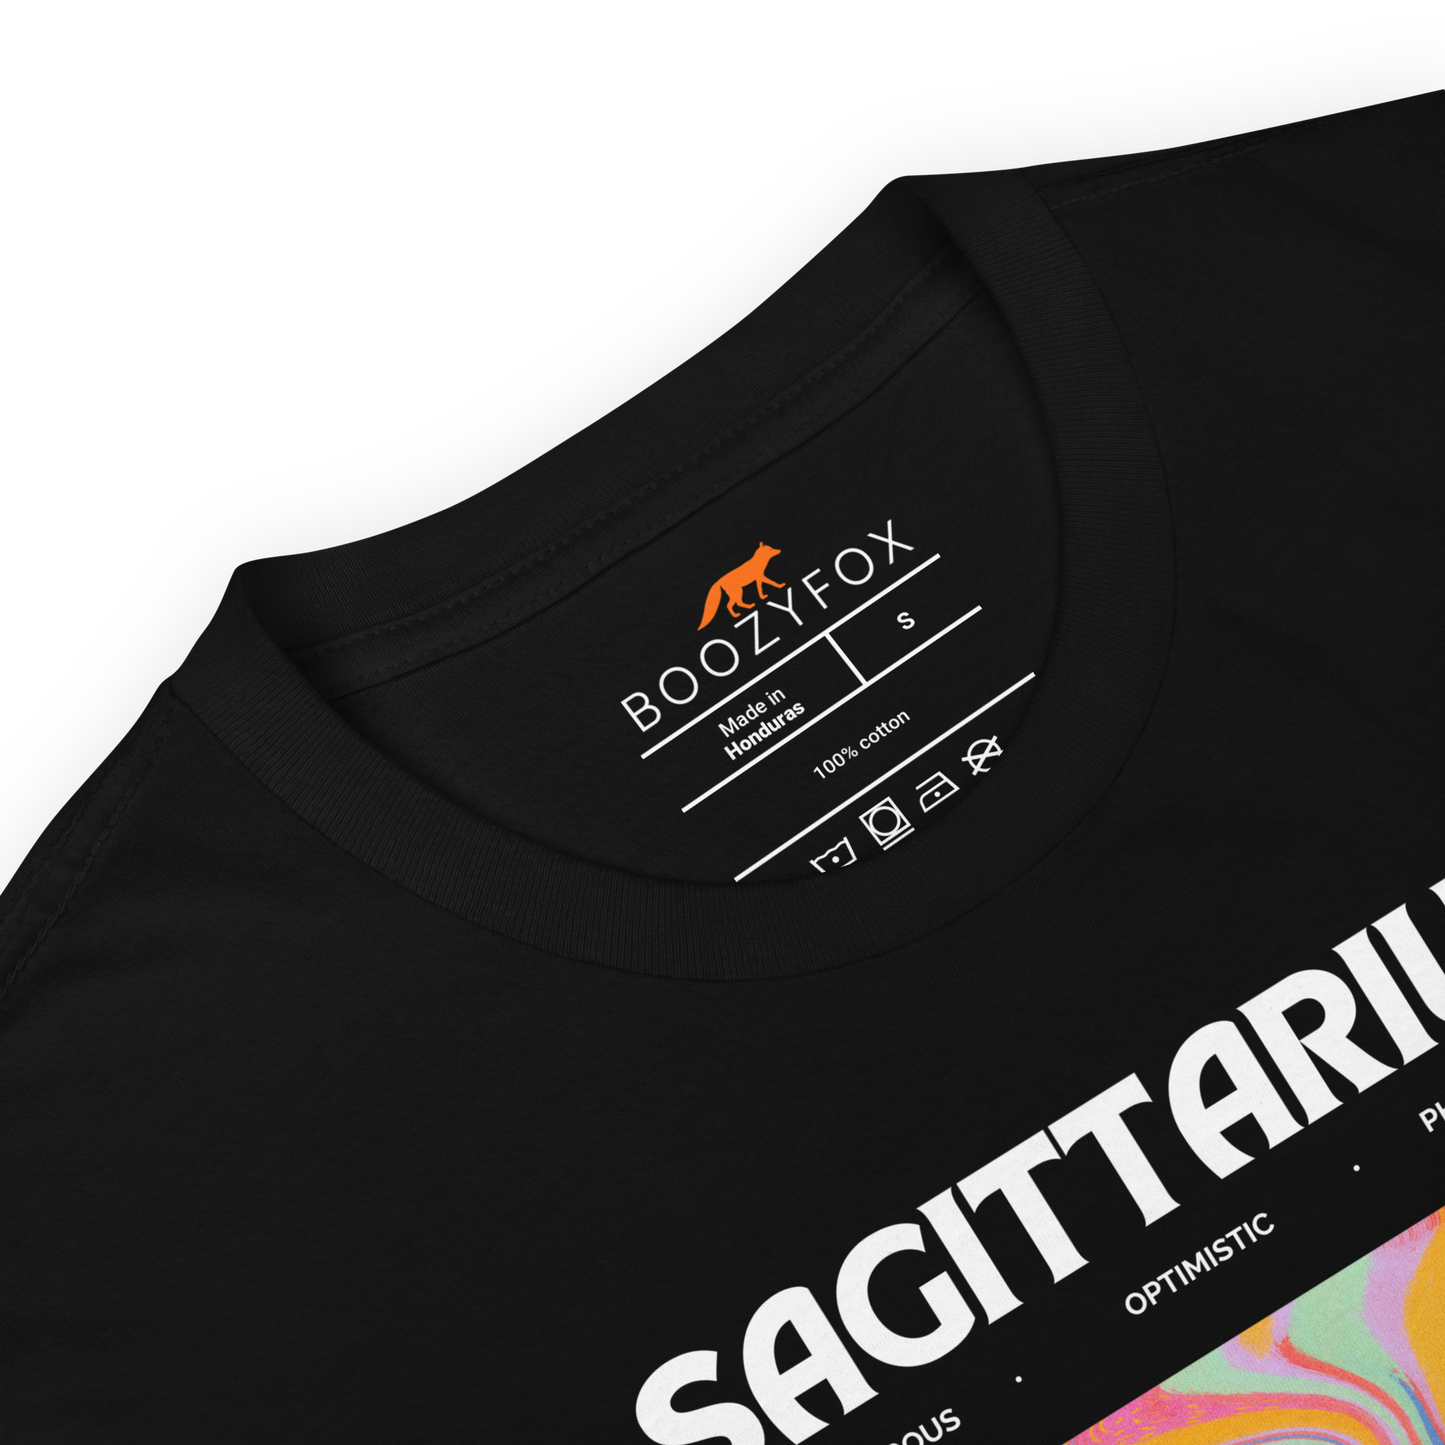 Product details of a Black Sagittarius T-Shirt featuring an Abstract Sagittarius Star Sign graphic on the chest - Cool Graphic Zodiac T-Shirts - Boozy Fox